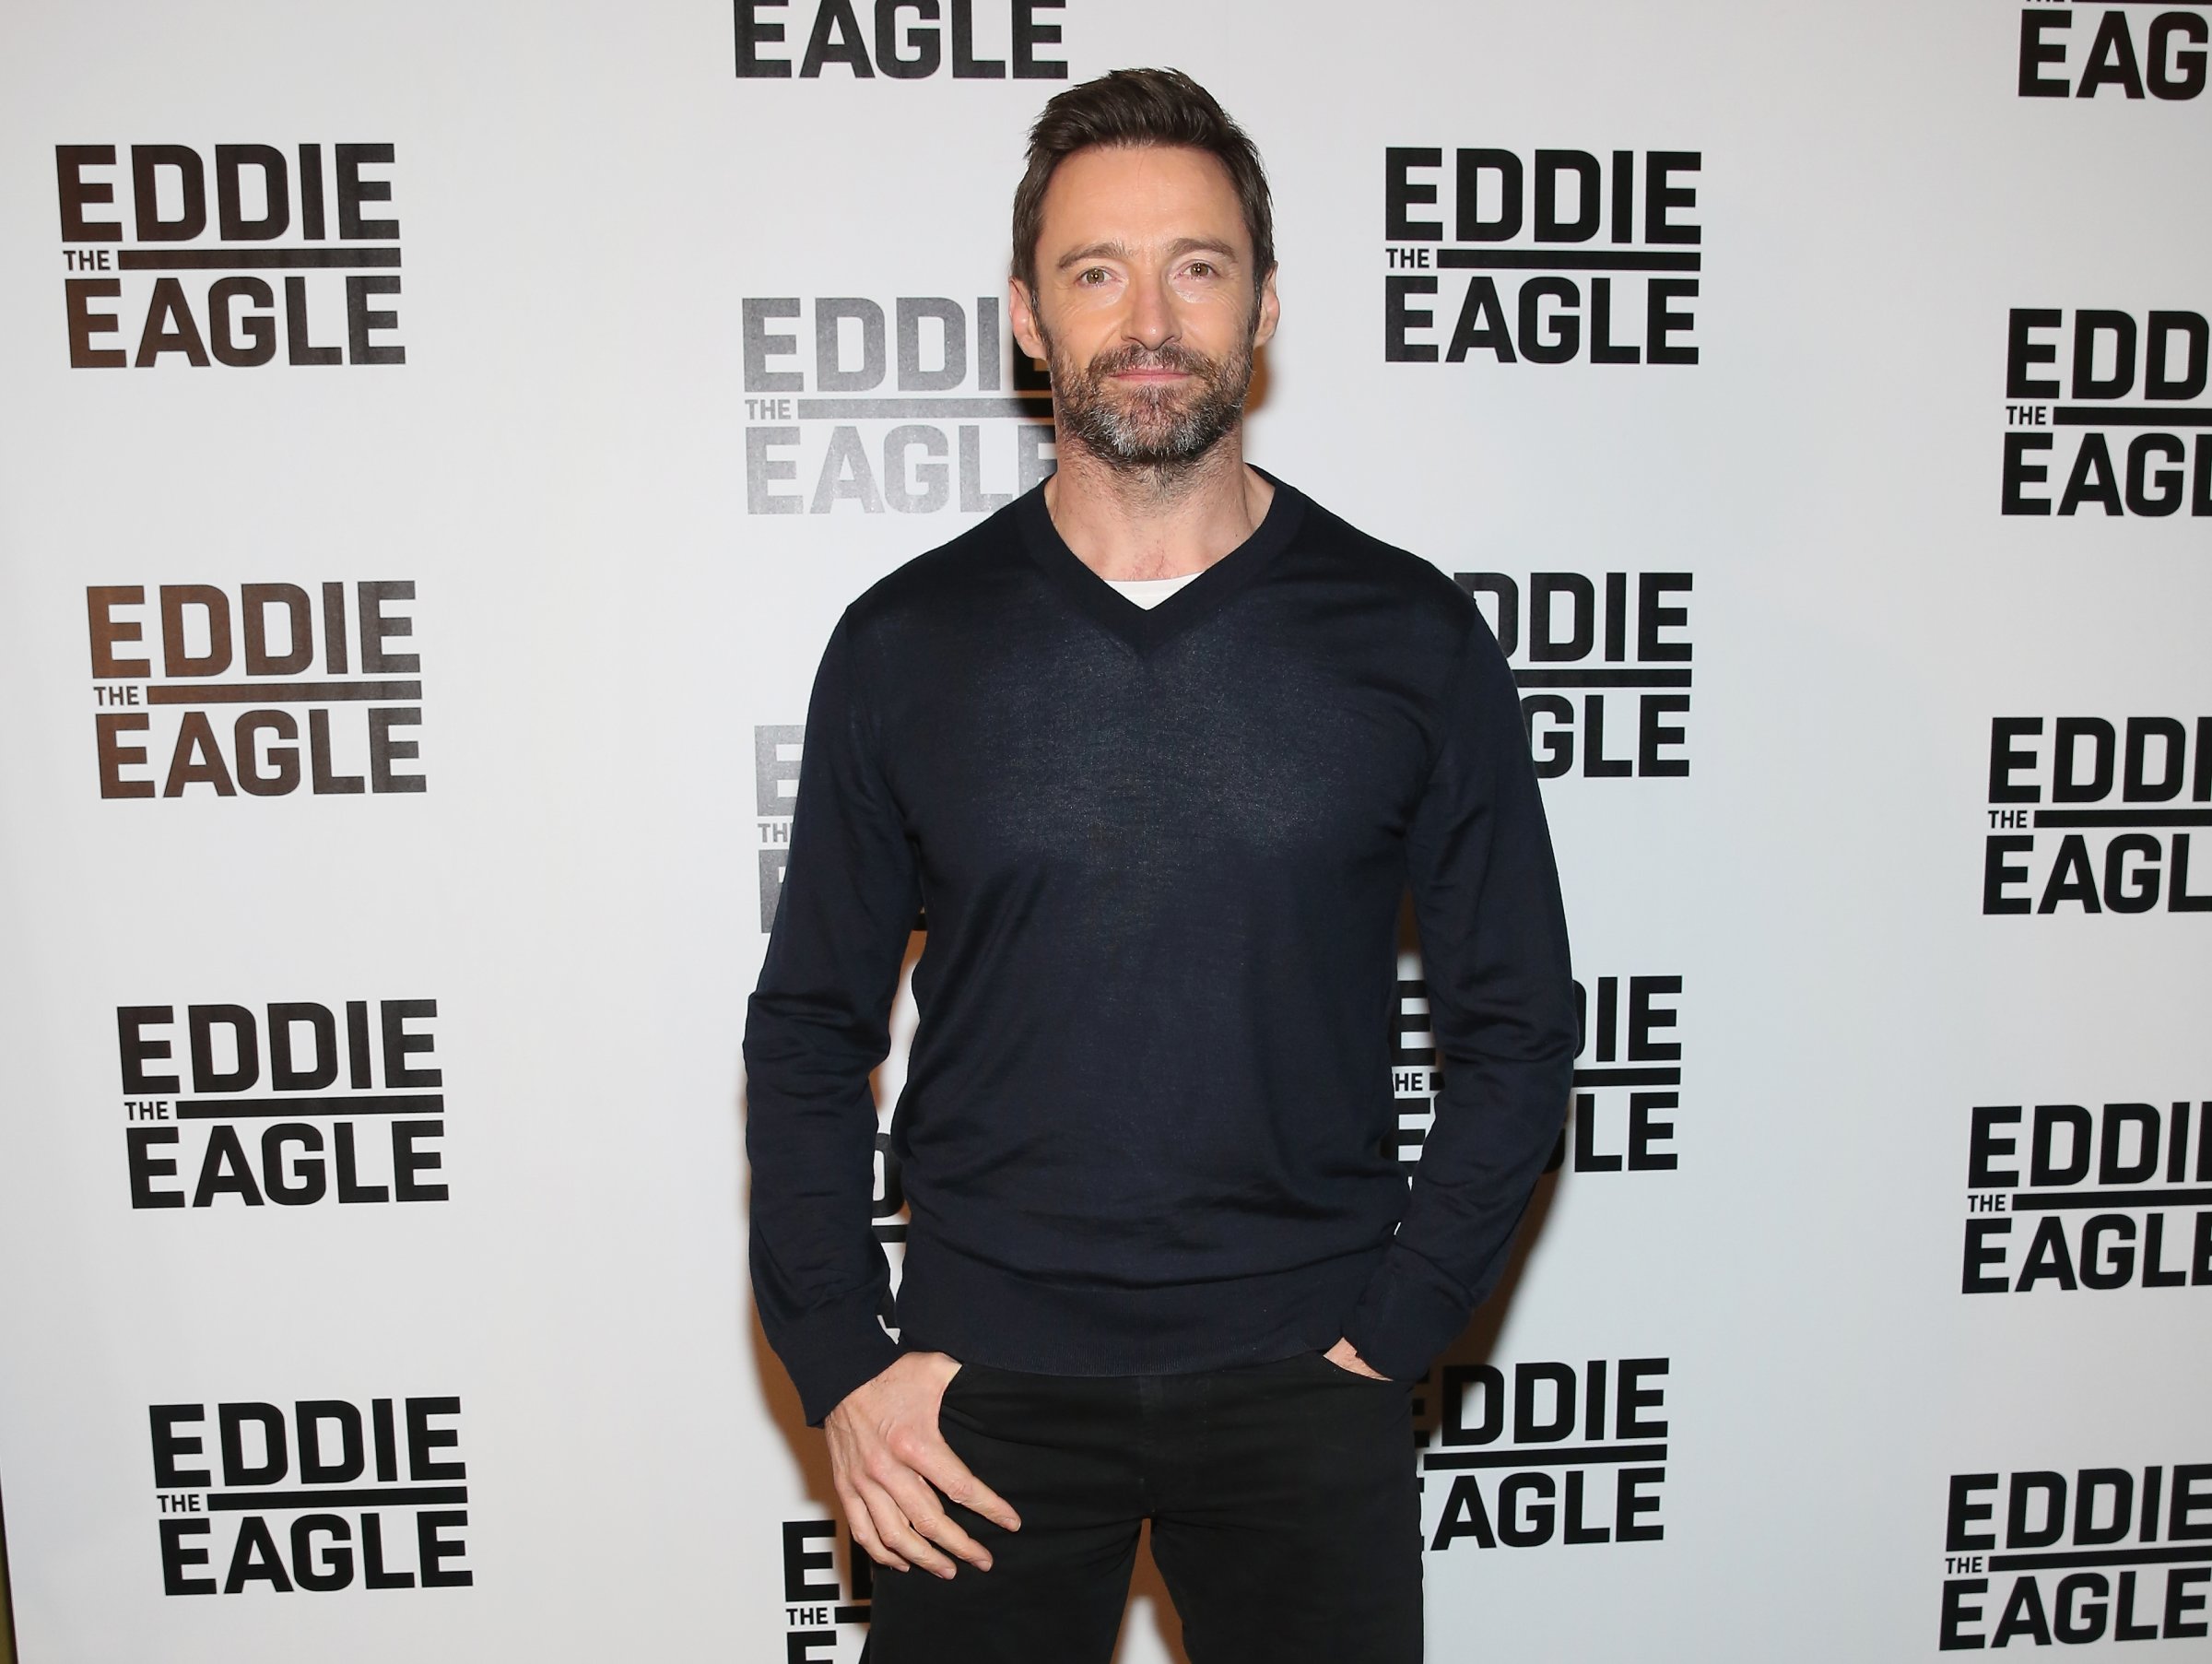 Hugh Jackman attends the "Eddie The Eagle" Screening at Landmark Sunshine Theater on February 2, 2016 in New York City.